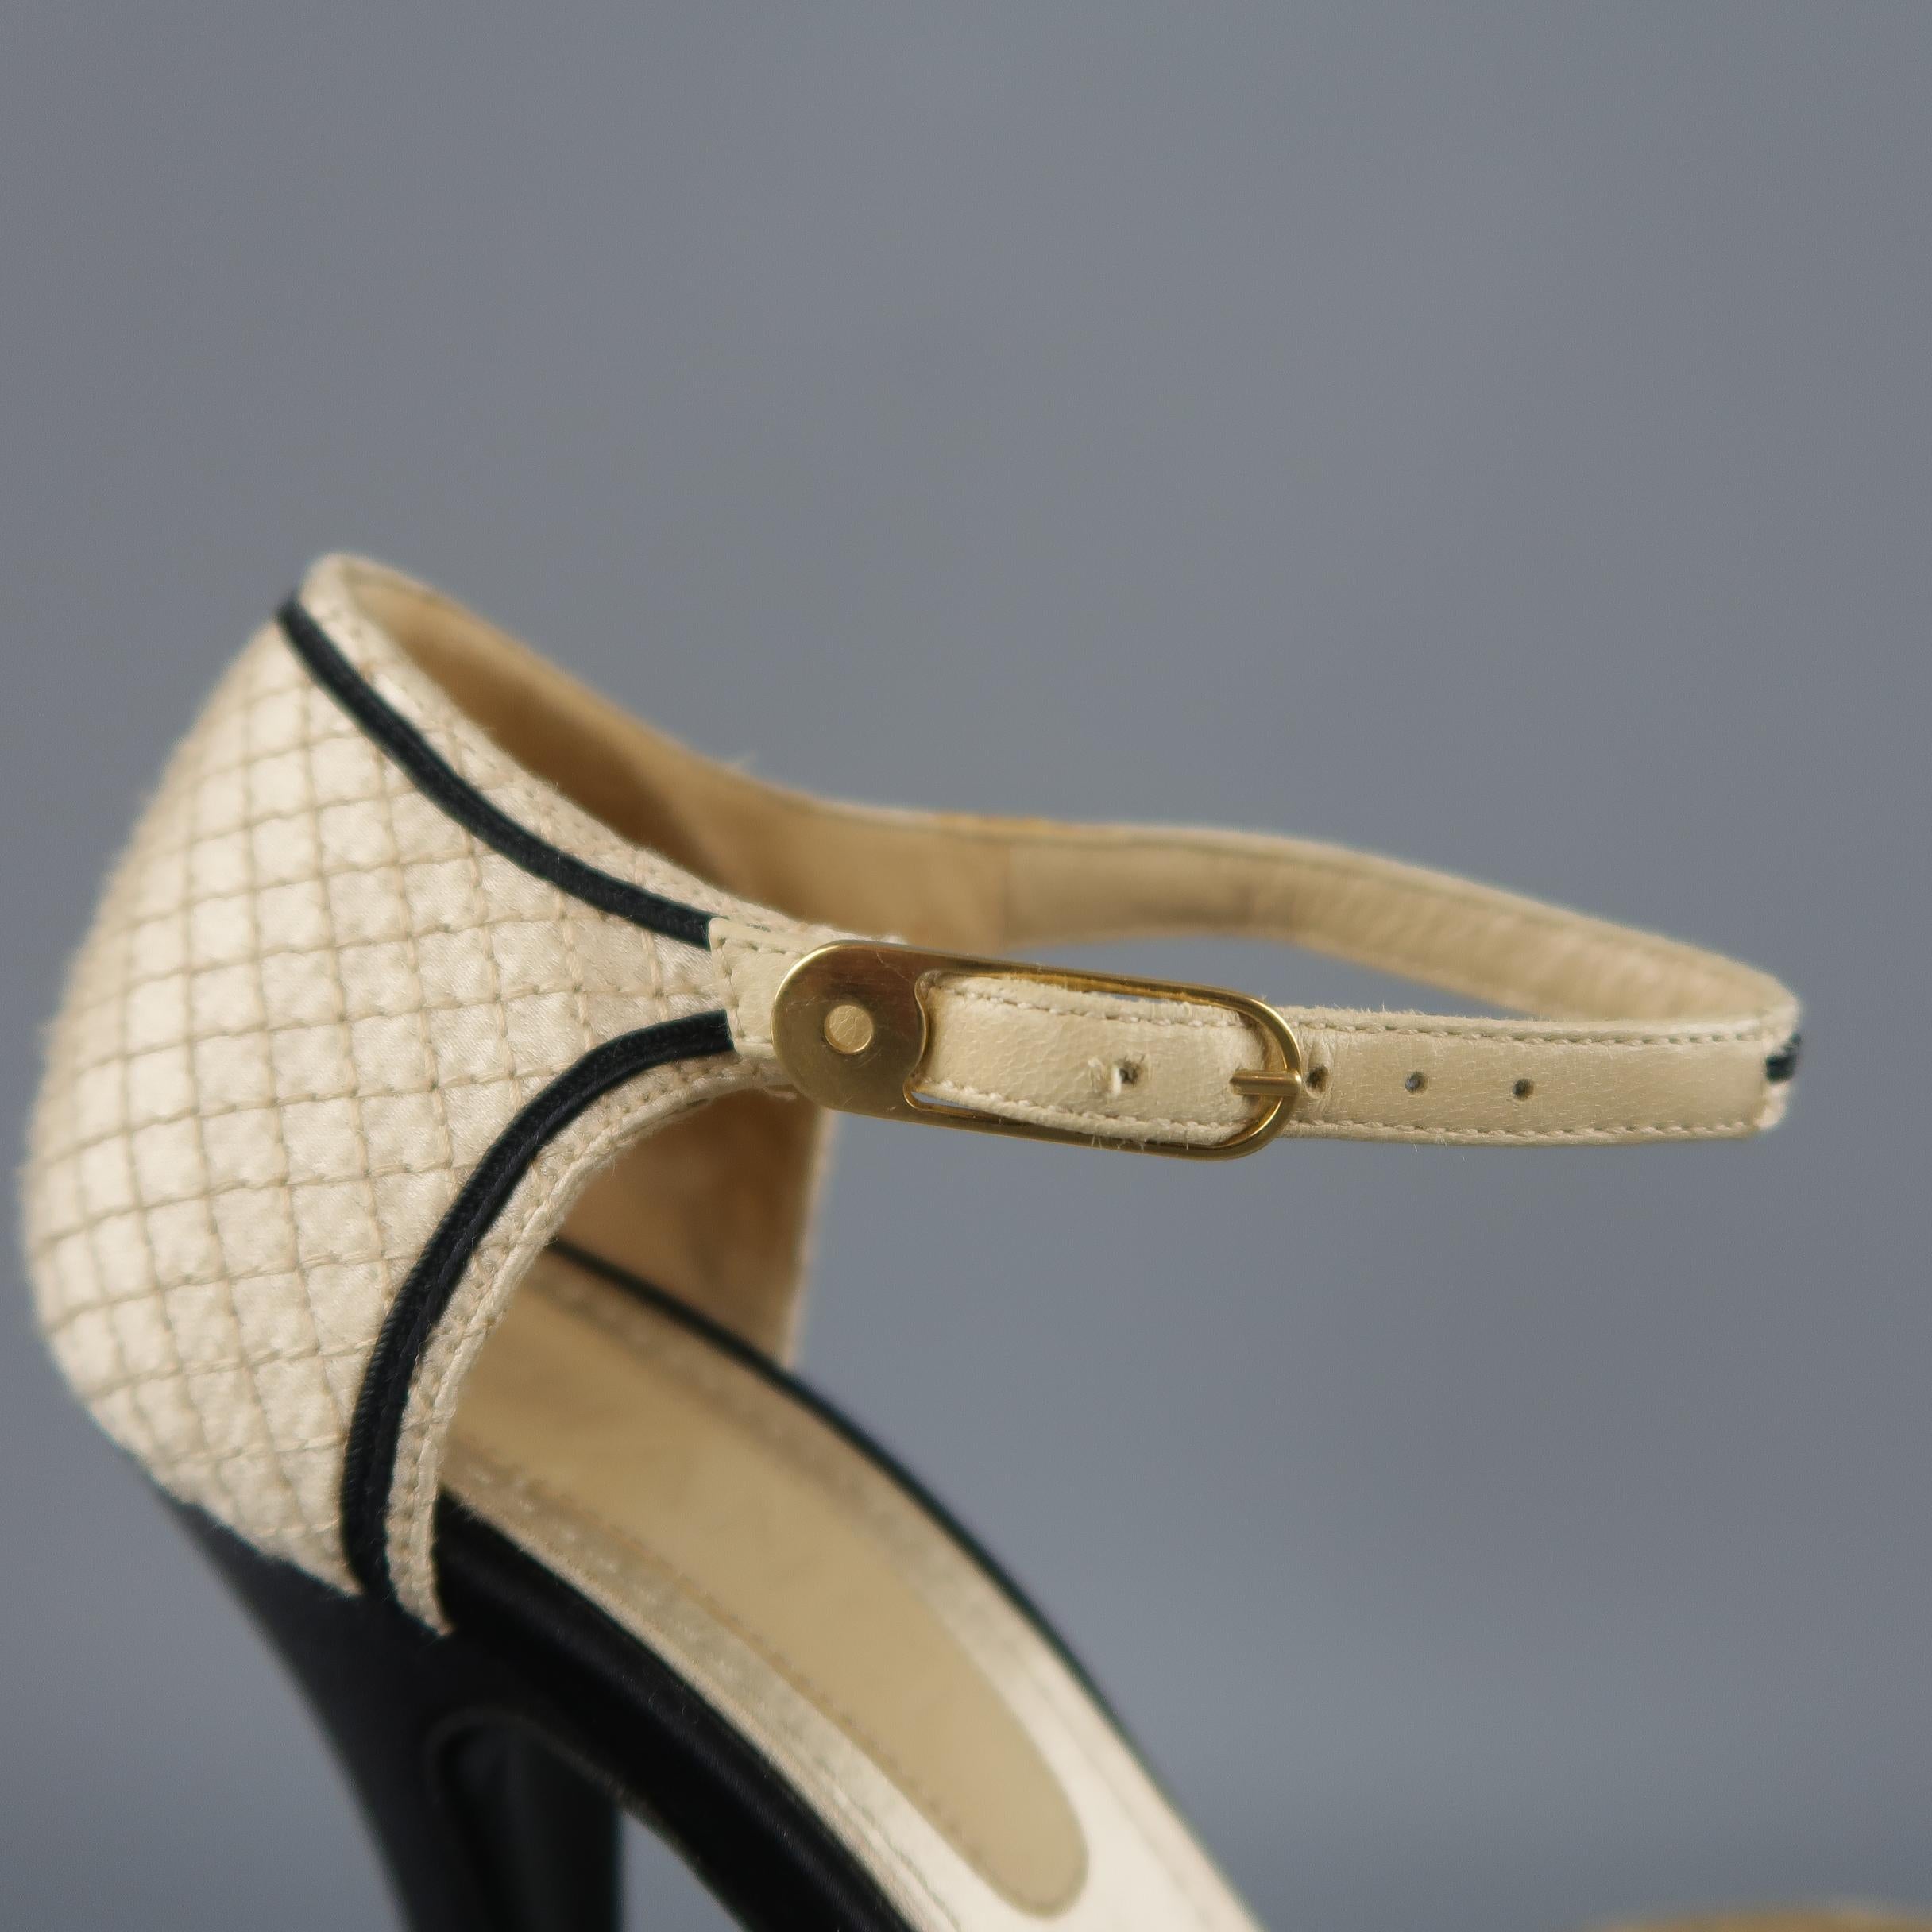 Vintage CHANEL pumps come in champagne beige quilted silk with black piping, a pointed toe with black toe cap, black covered heel, and ankle strap. Missing CC emblem on buckles. As-is. Made in Italy.
 
Good Pre-Owned Condition.
Marked: IT 37
 
Heel: